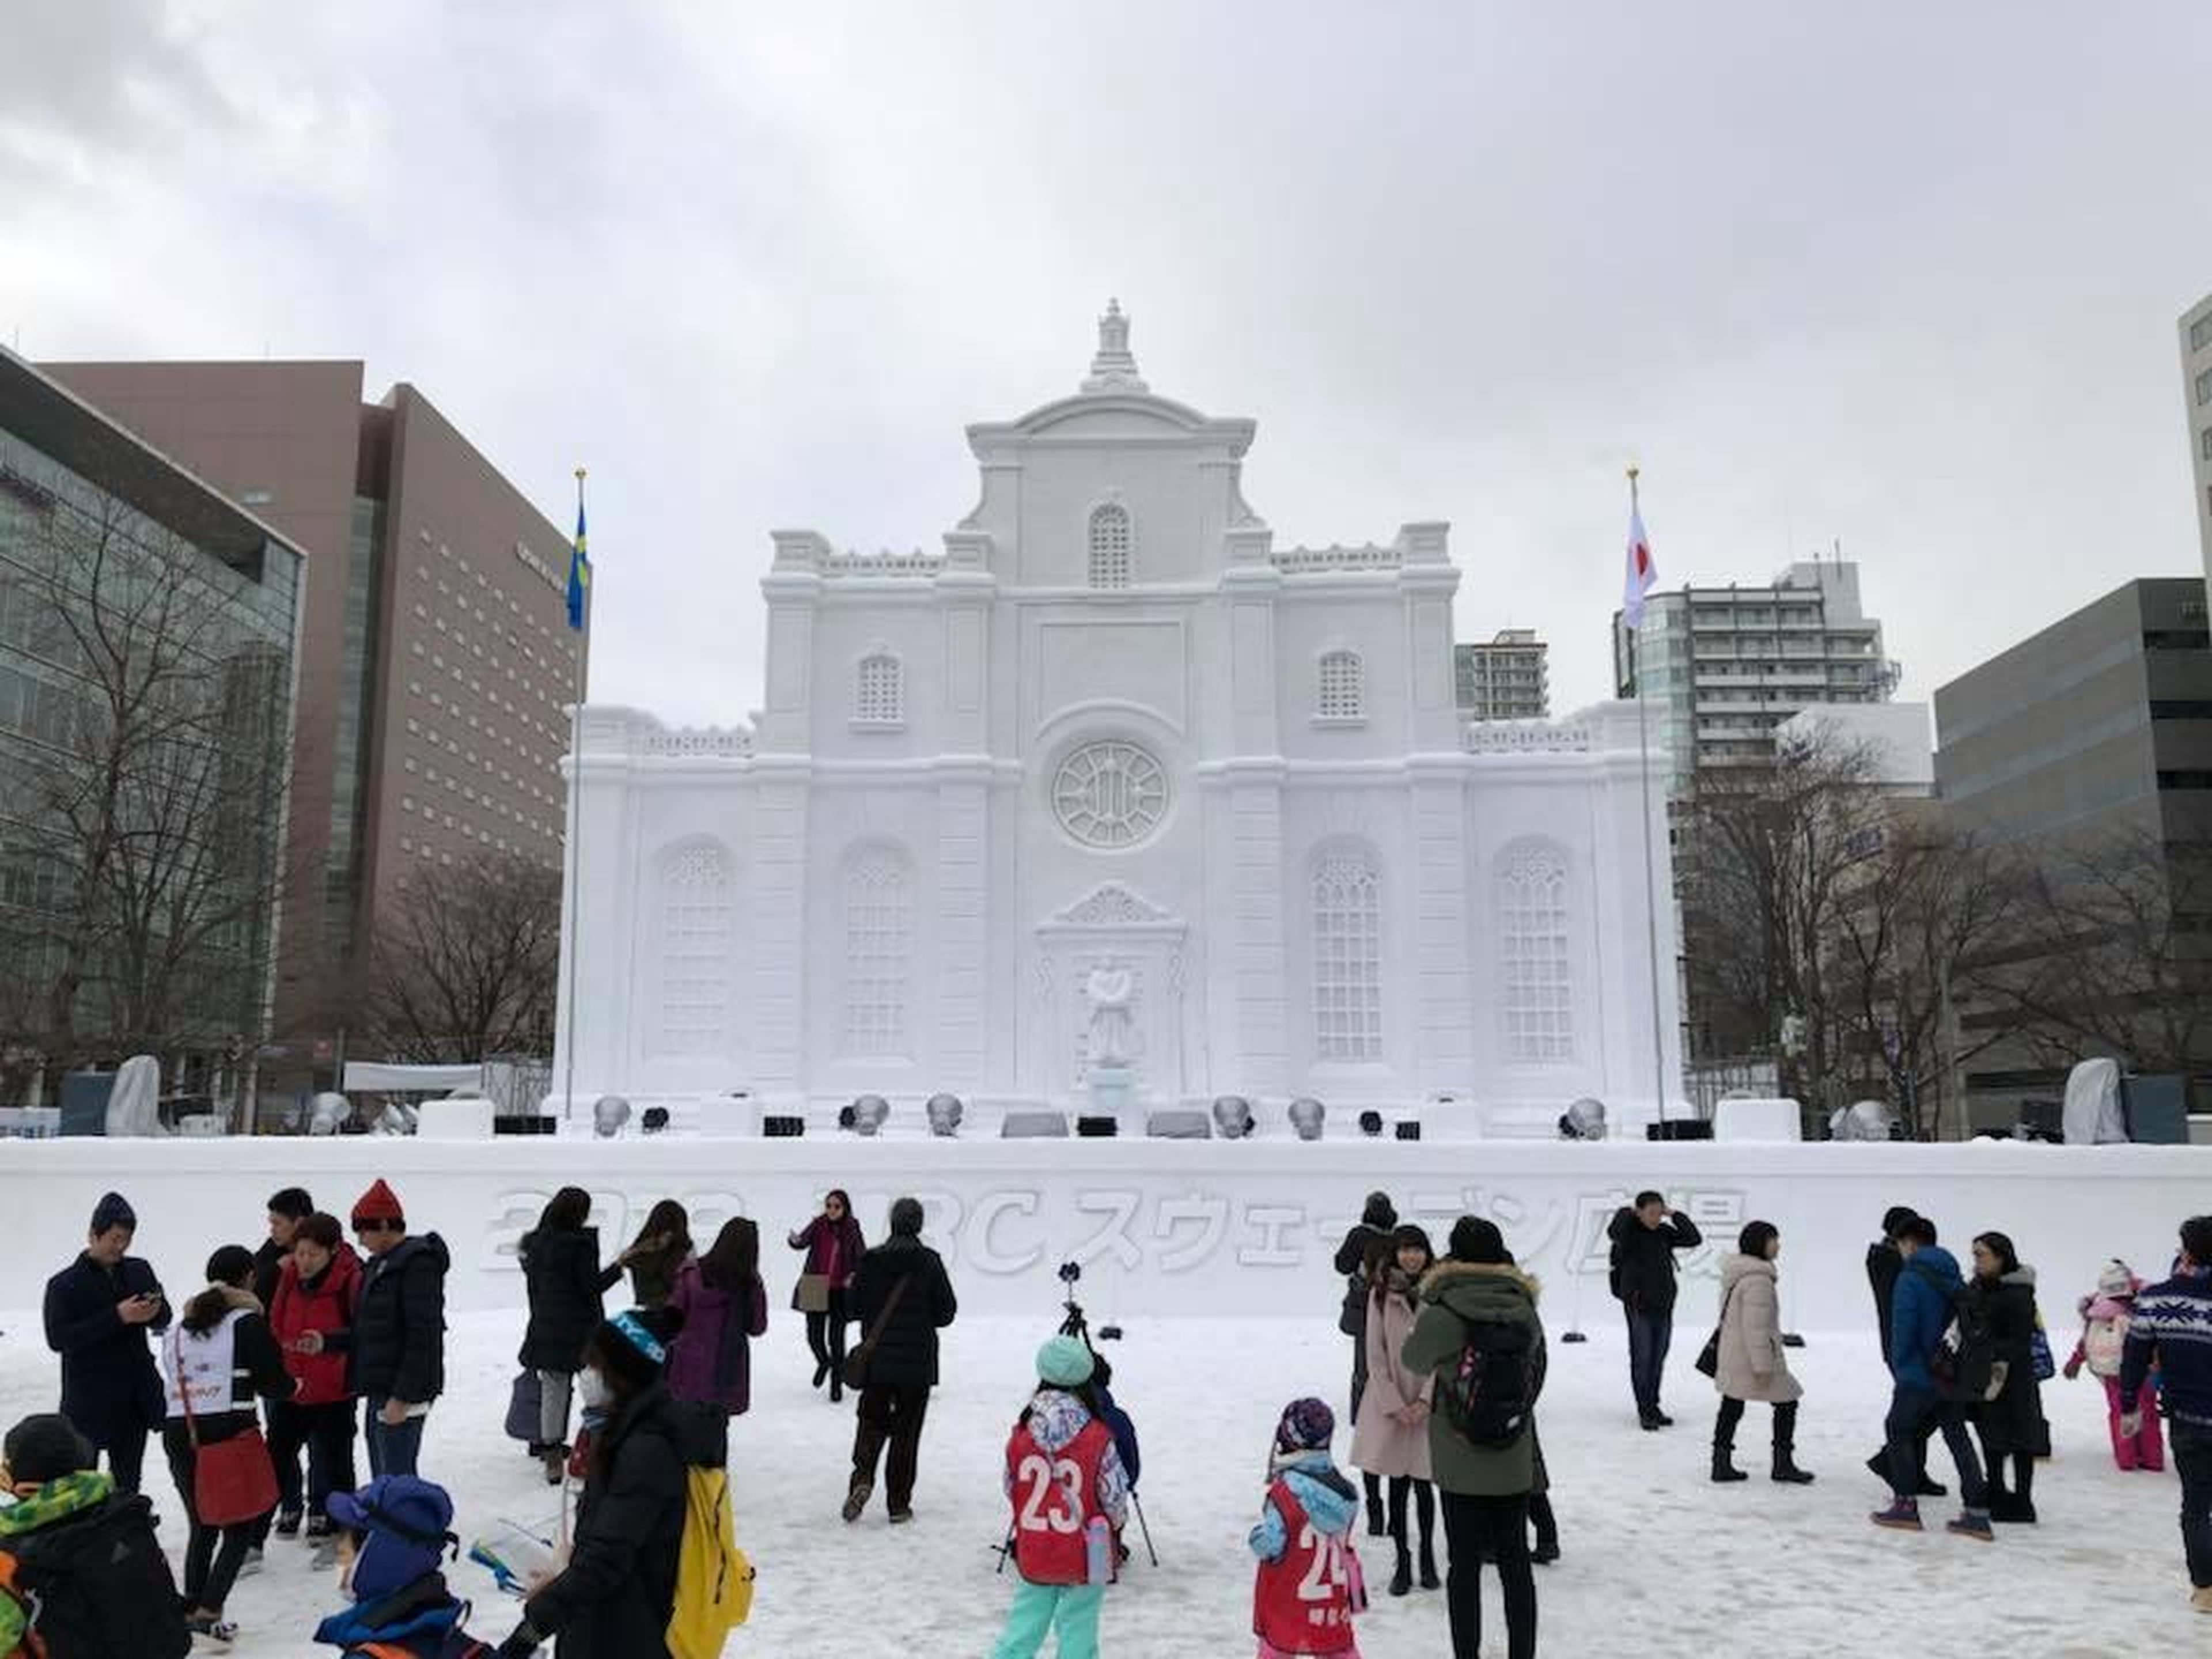 Pictured here is the Stockholm Cathedral made out of snow for the 2018 Sapporo Snow Festival.